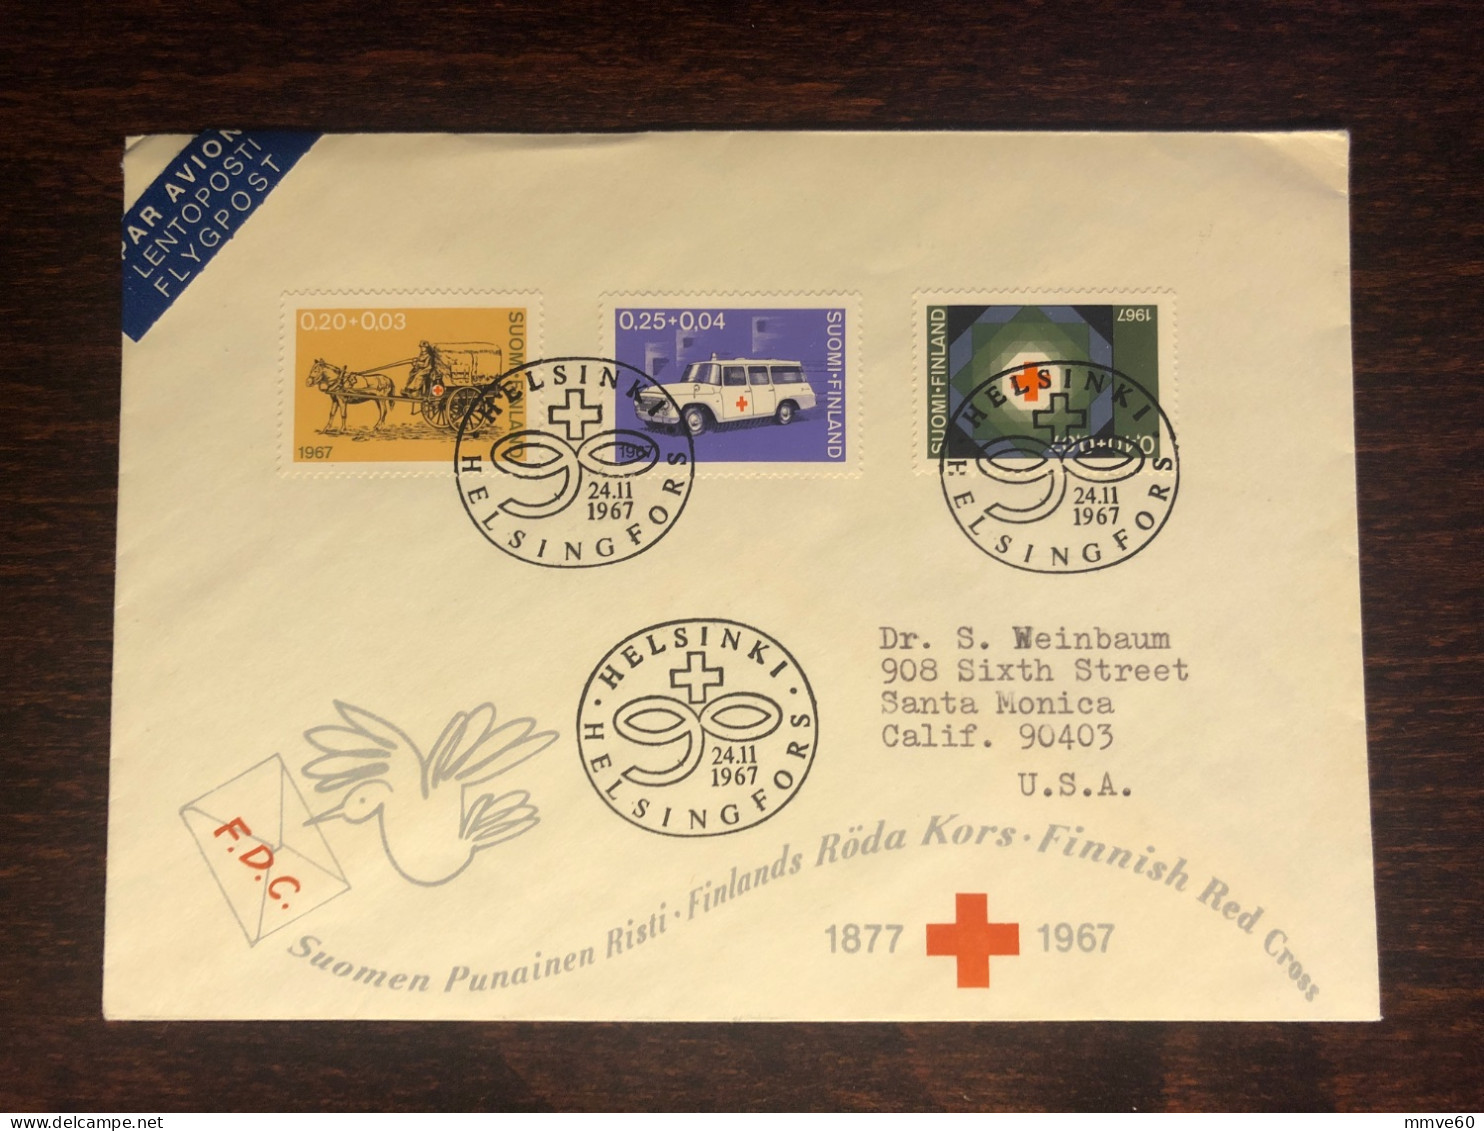 FINLAND FDC  TRAVELED COVER 1967 YEAR RED CROSS  HEALTH MEDICINE - Covers & Documents